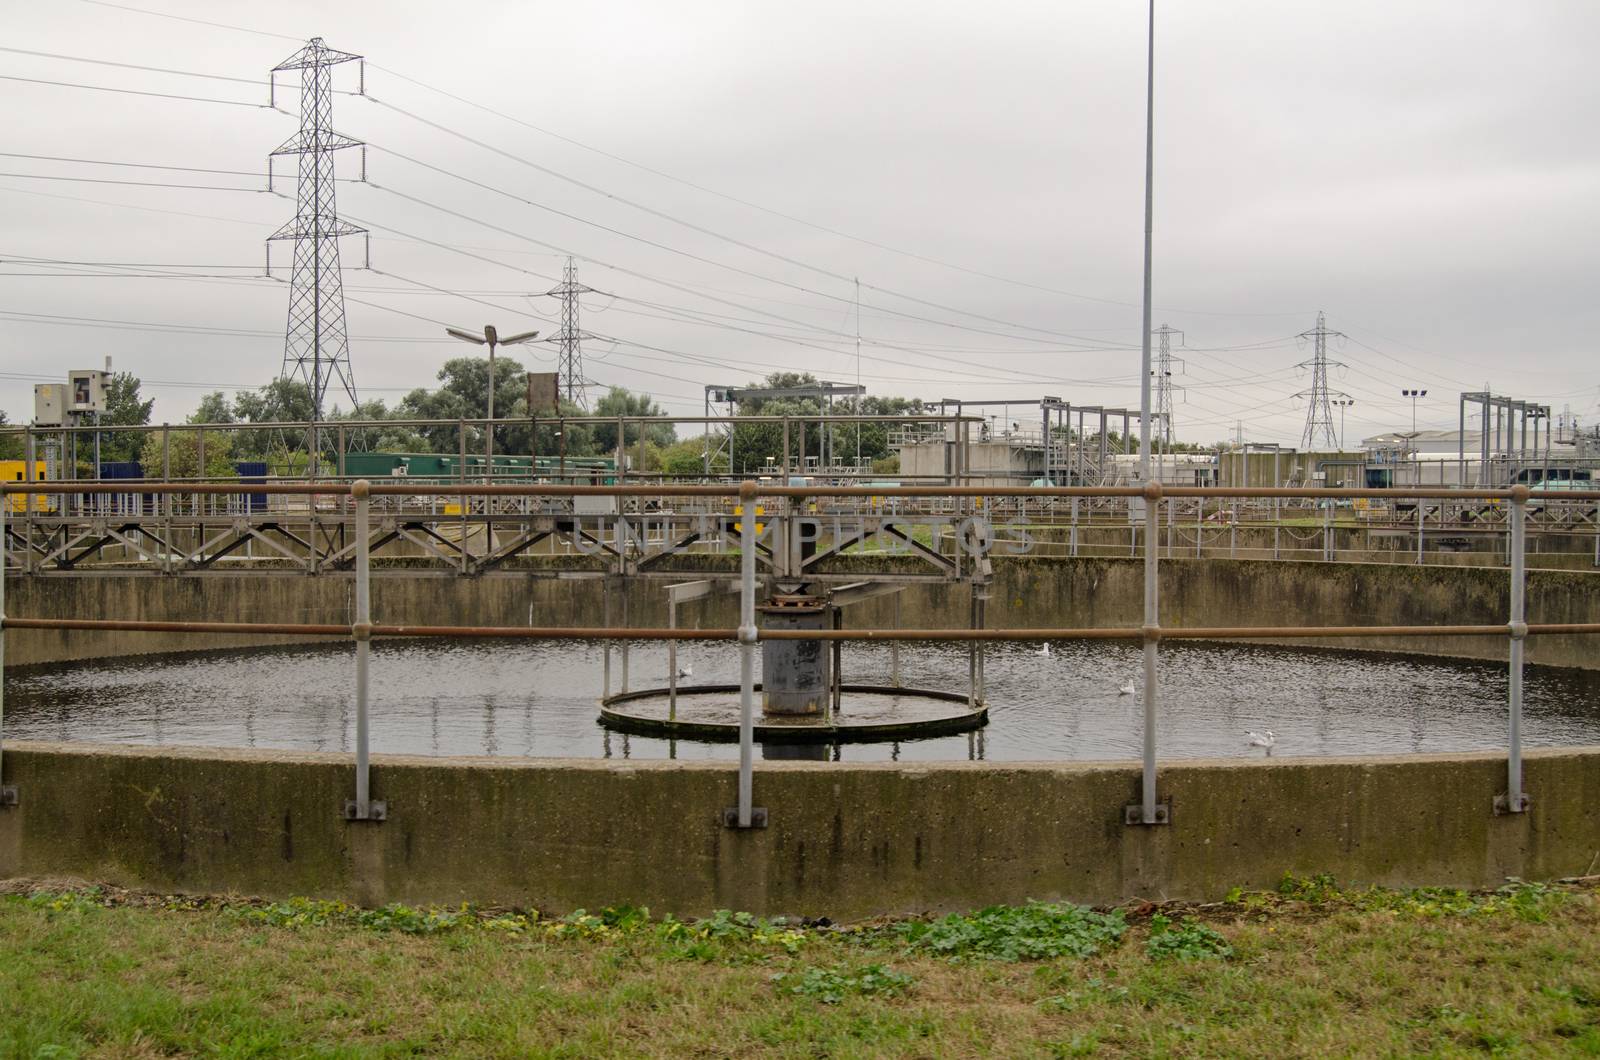 View of a primary settlement tank at a sewage treatment works on an overcast afternoon in Autumn.  Sewage is left in the circular tank and solids fall to the bottom to be scraped up and pumped away.  